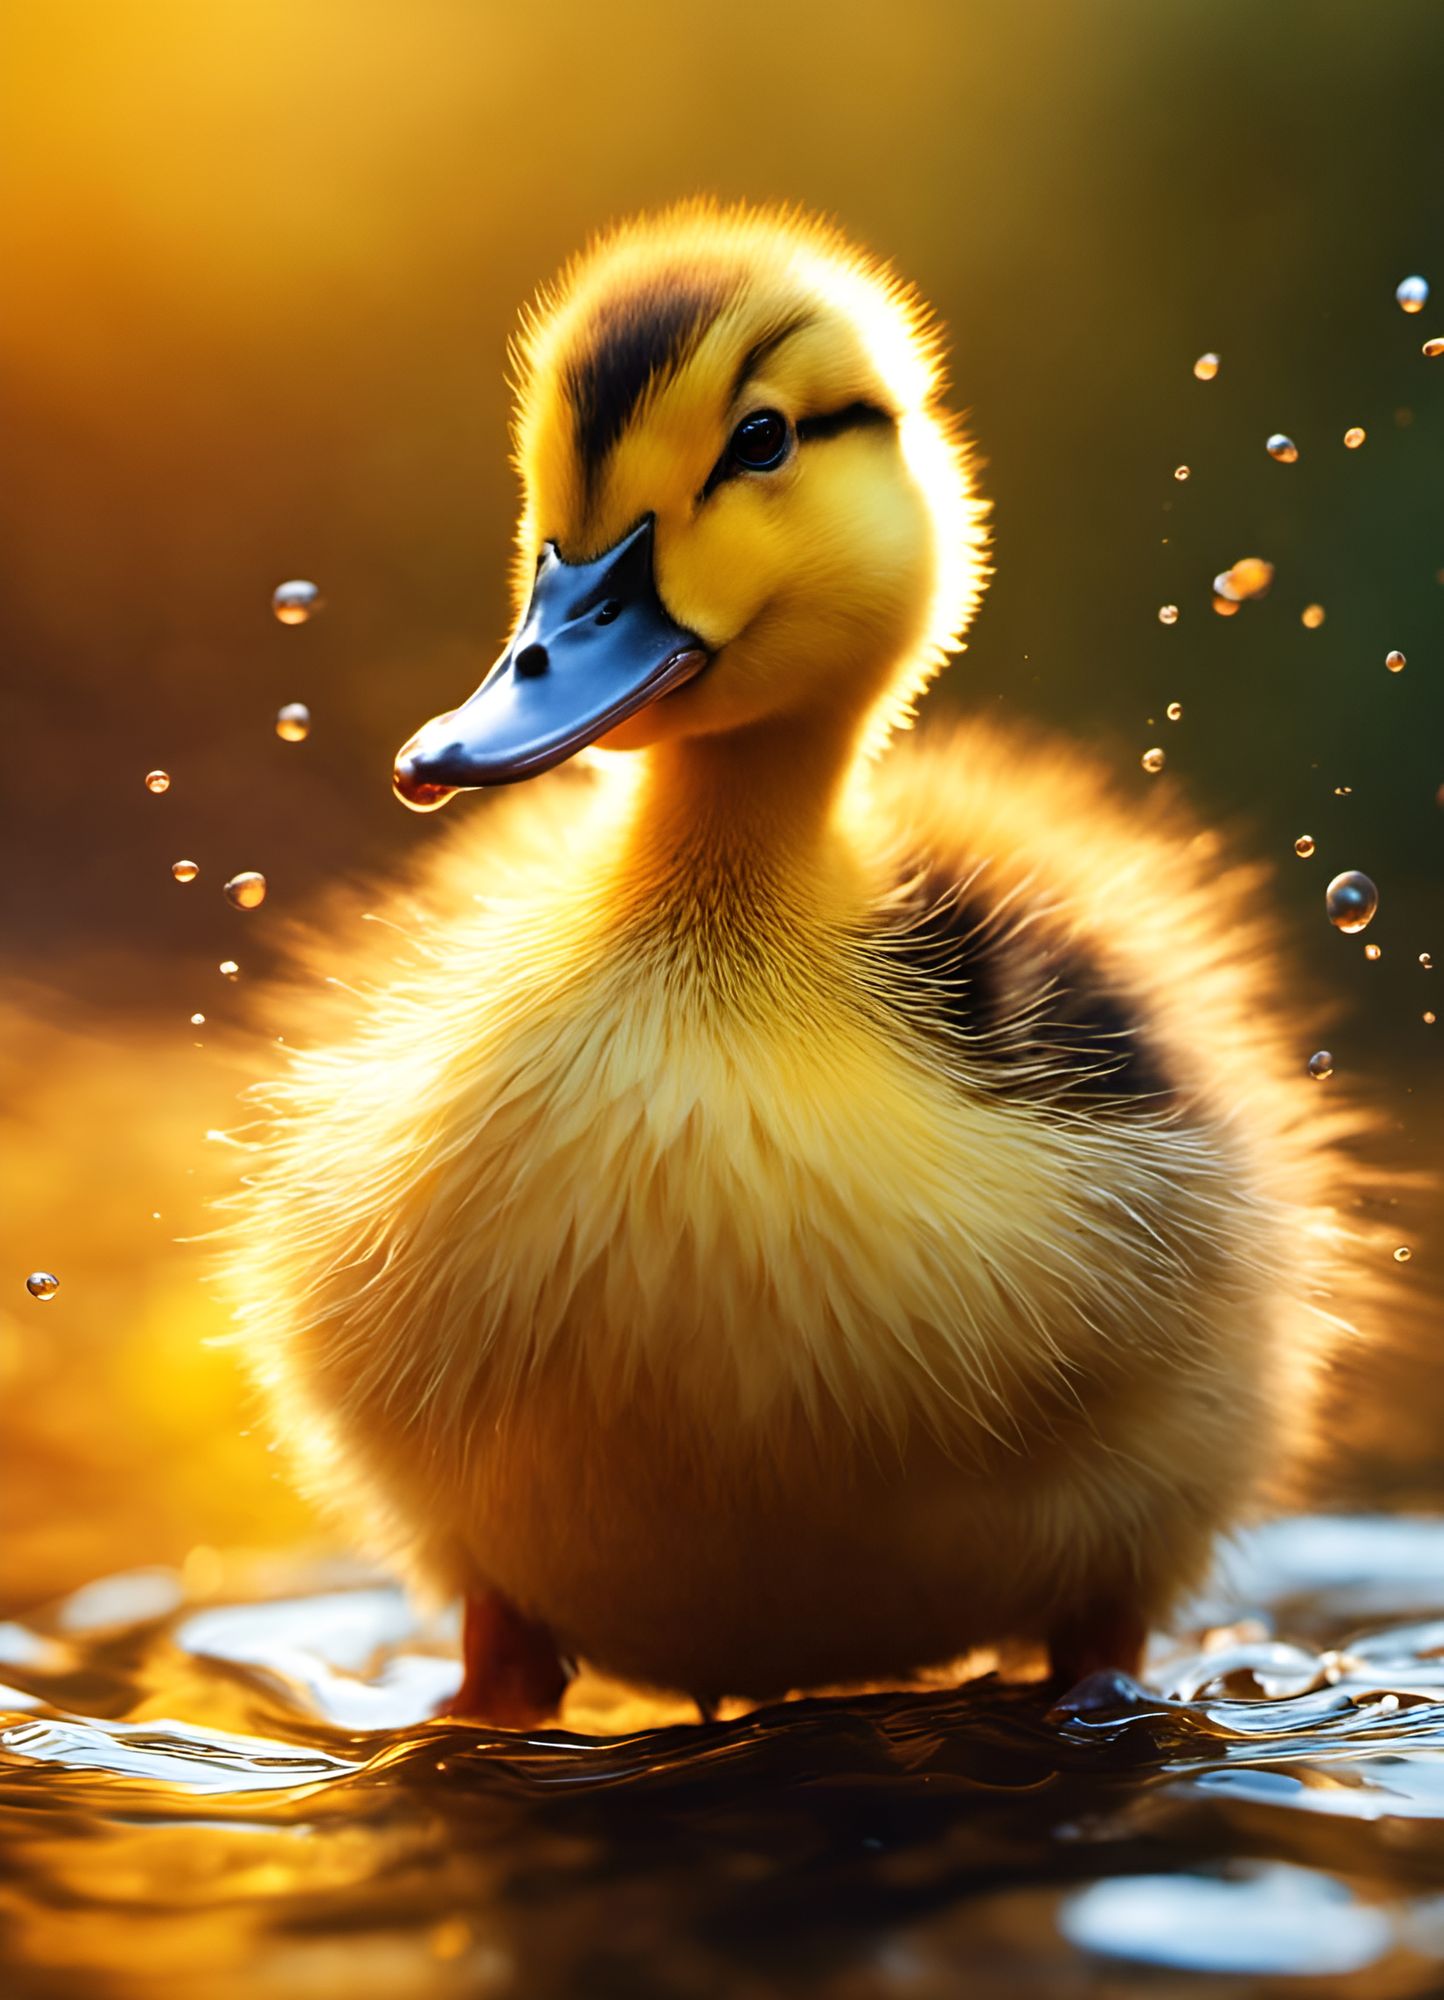 Cute Duck wallpaper by __Sonia__ - Download on ZEDGE™ | fe9f